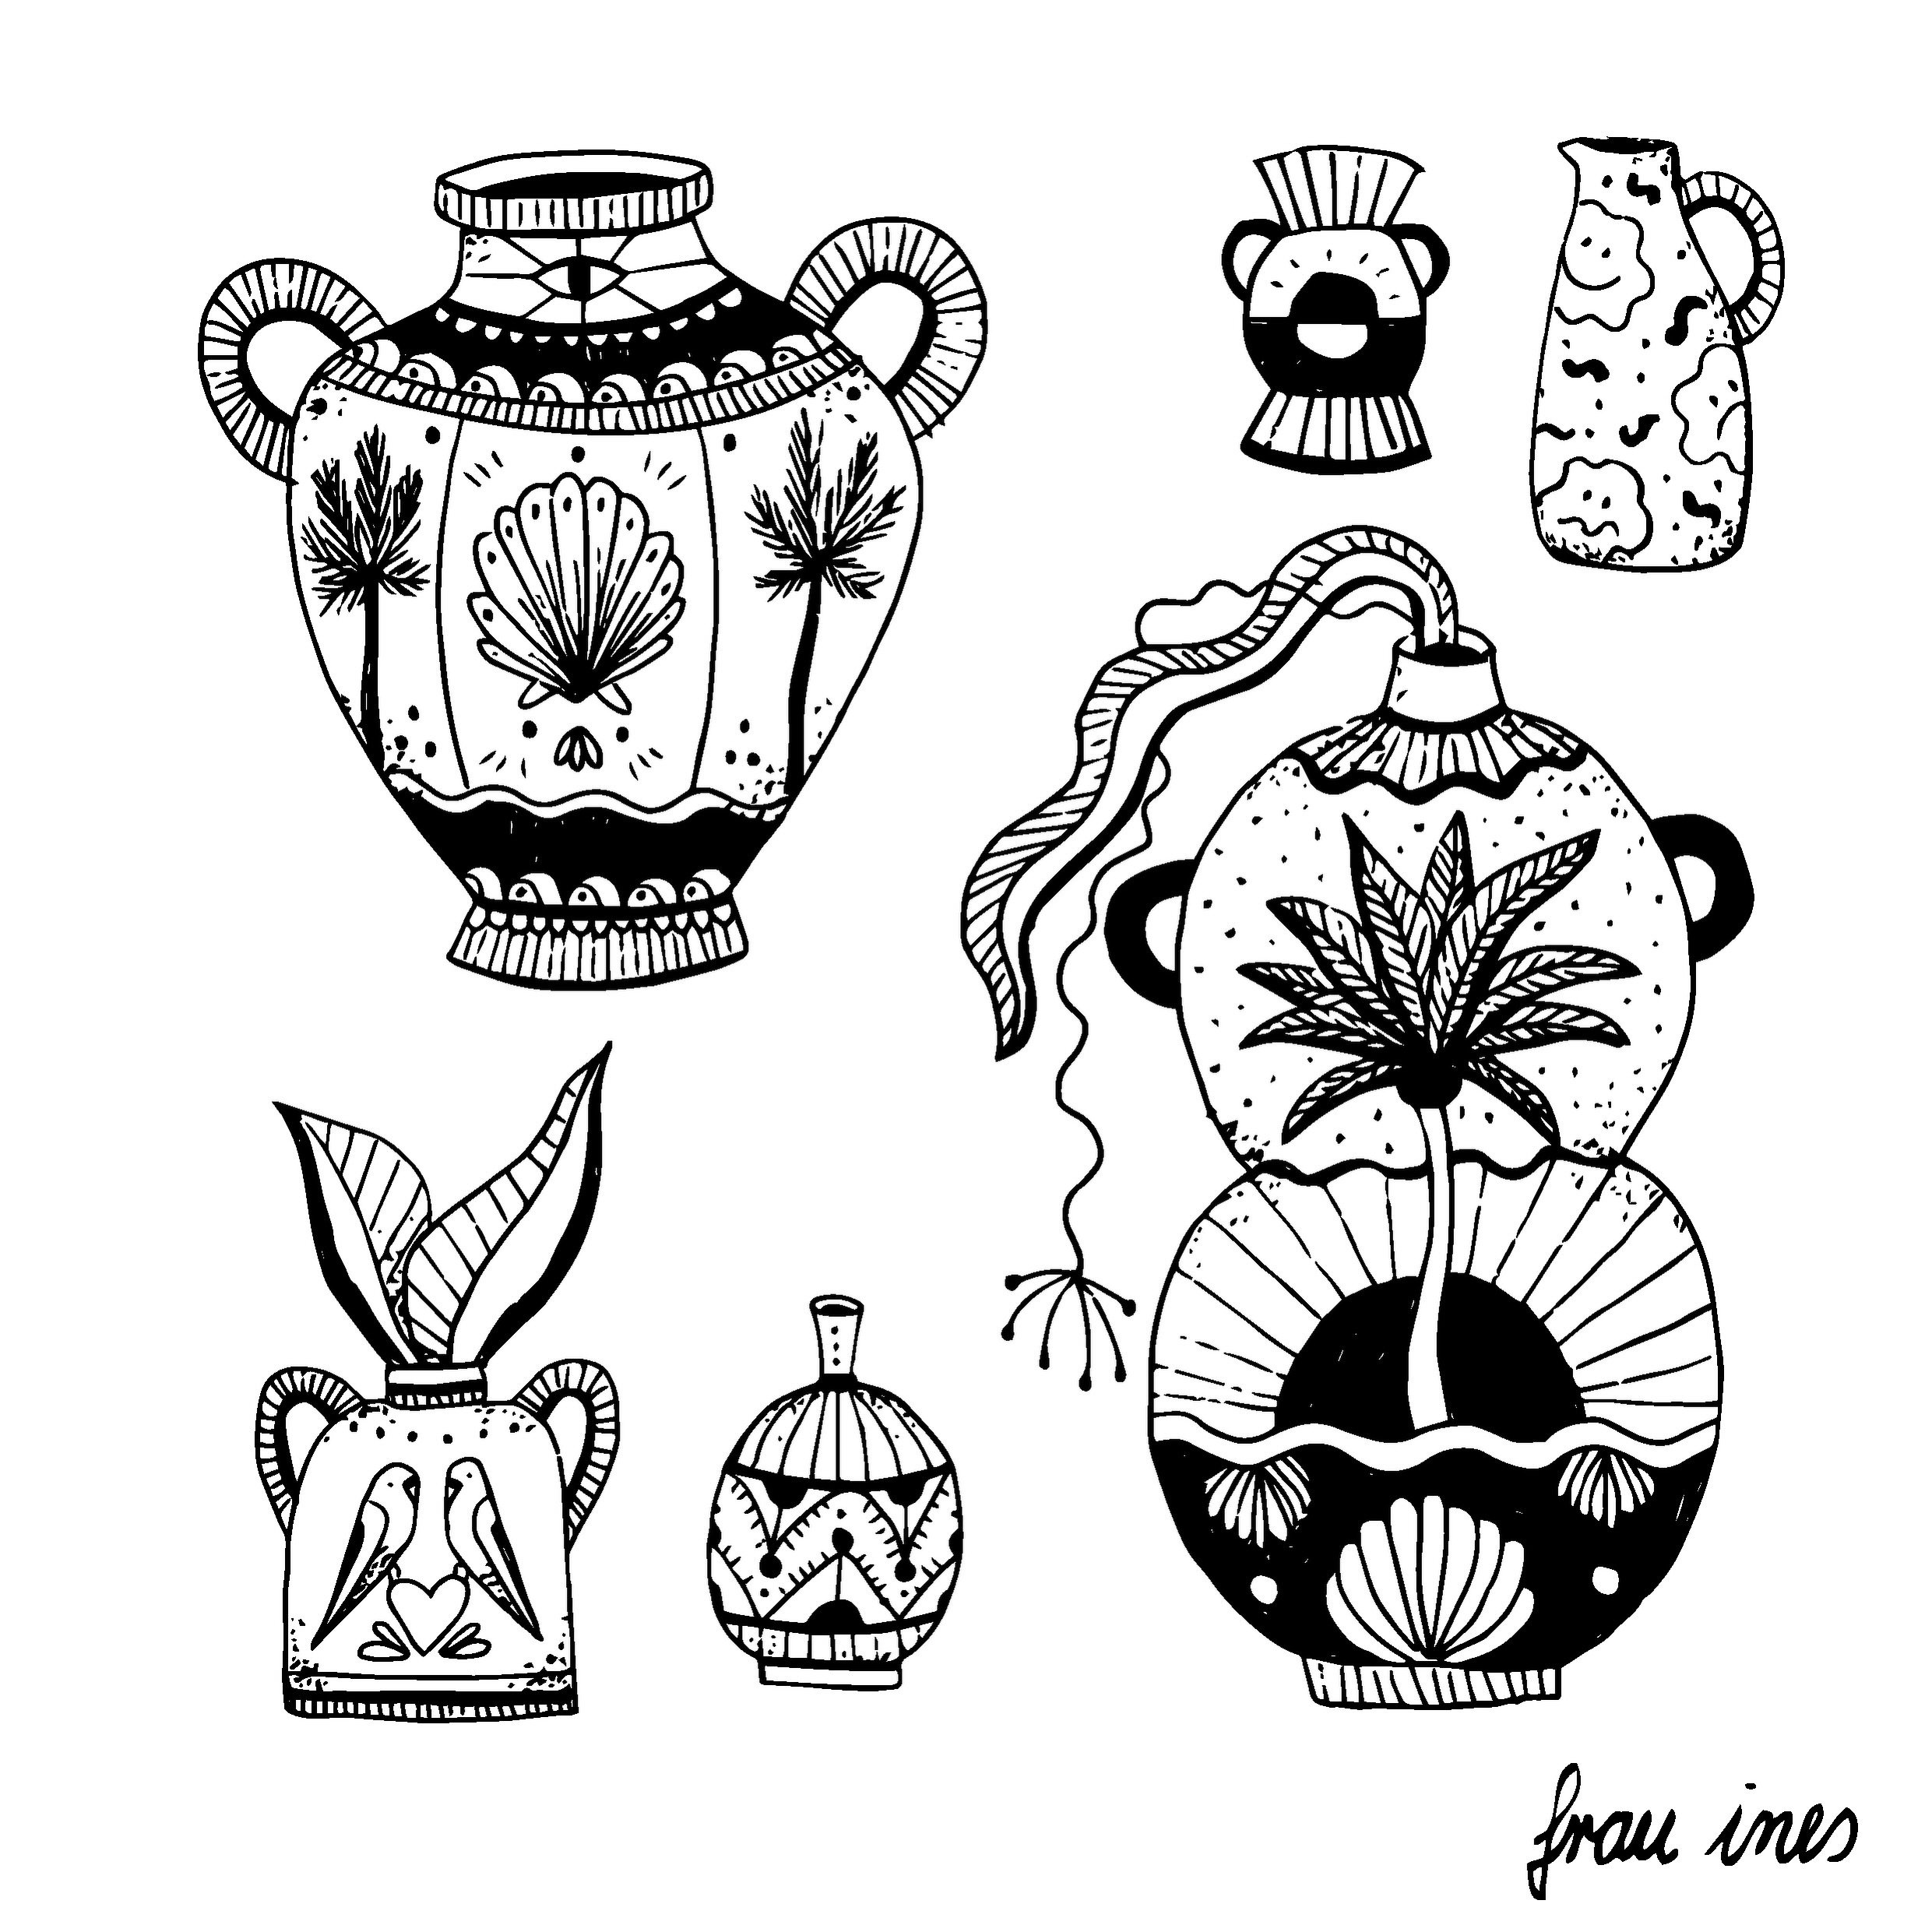 Third #newflash for you 🌞🏺🌴
It&rsquo;s all about big summer vases 💞

⫸ 
Booking info: If you are interested in one of these #frauineswannados and want to get inked, please email me on Thursday 09.05.| 12h 🫶🏻 #nodms 

The following information m